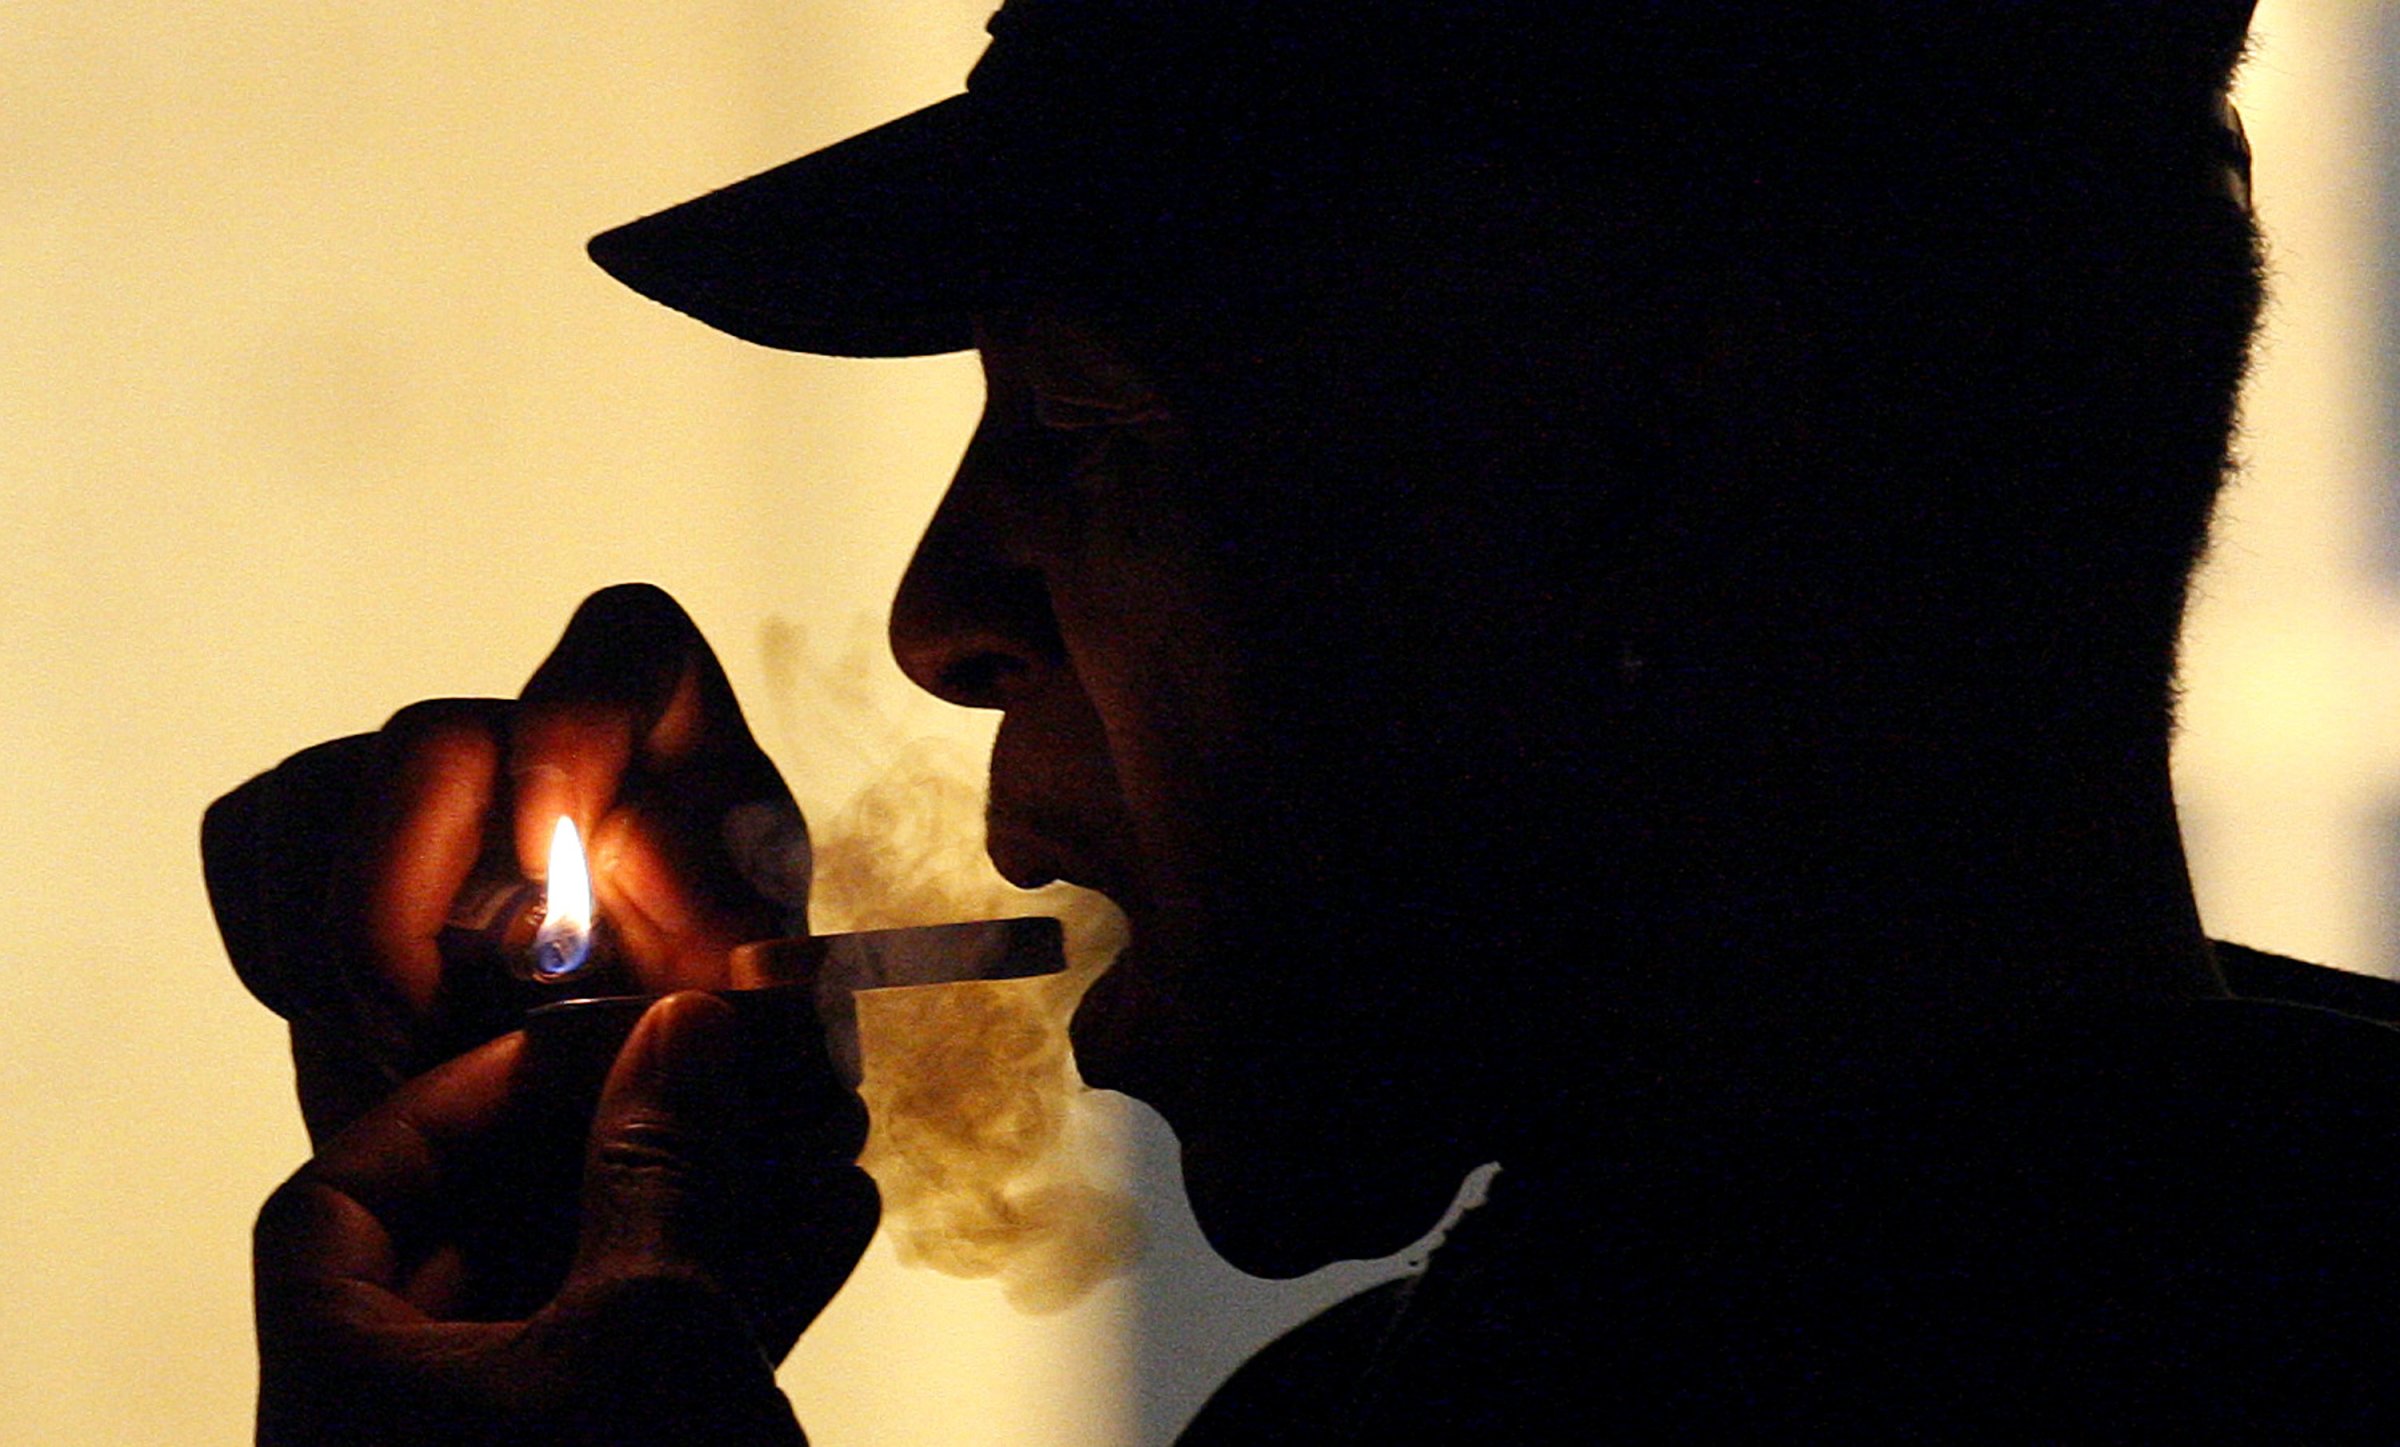 File - In this May 5, 2011, an unidentified man is seen smoking medical marijuana during karaoke night at the Cannabis Café, in Portland, Ore